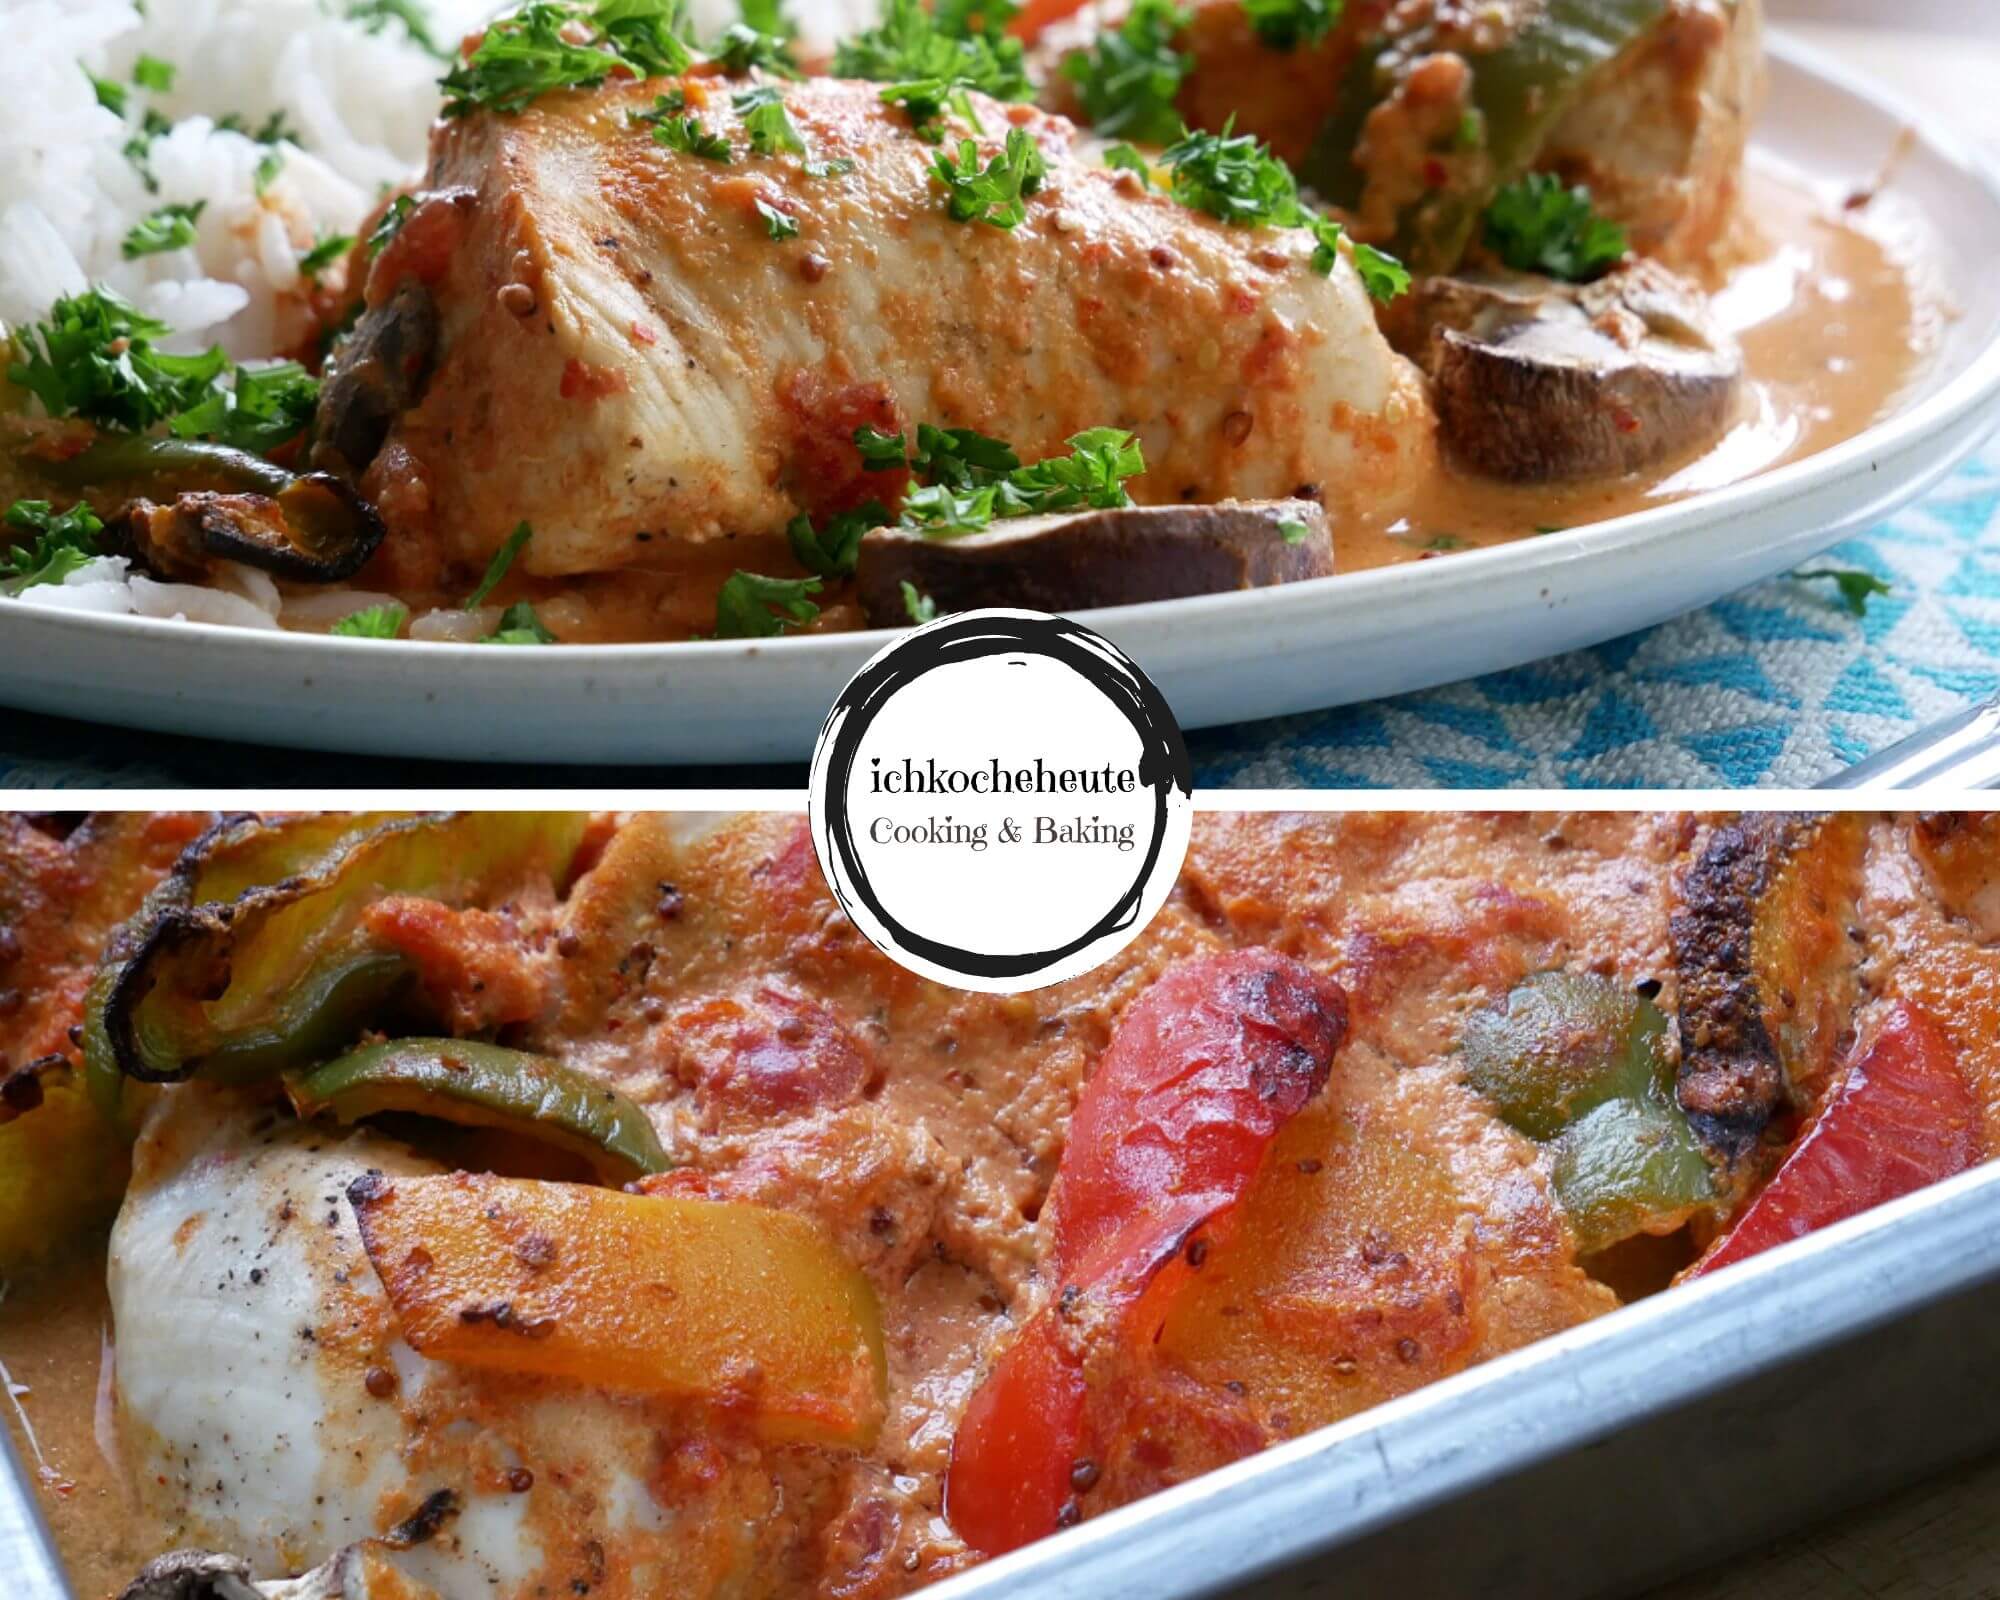 Serving Oven Baked Chicken with Bell Peppers & Mushrooms